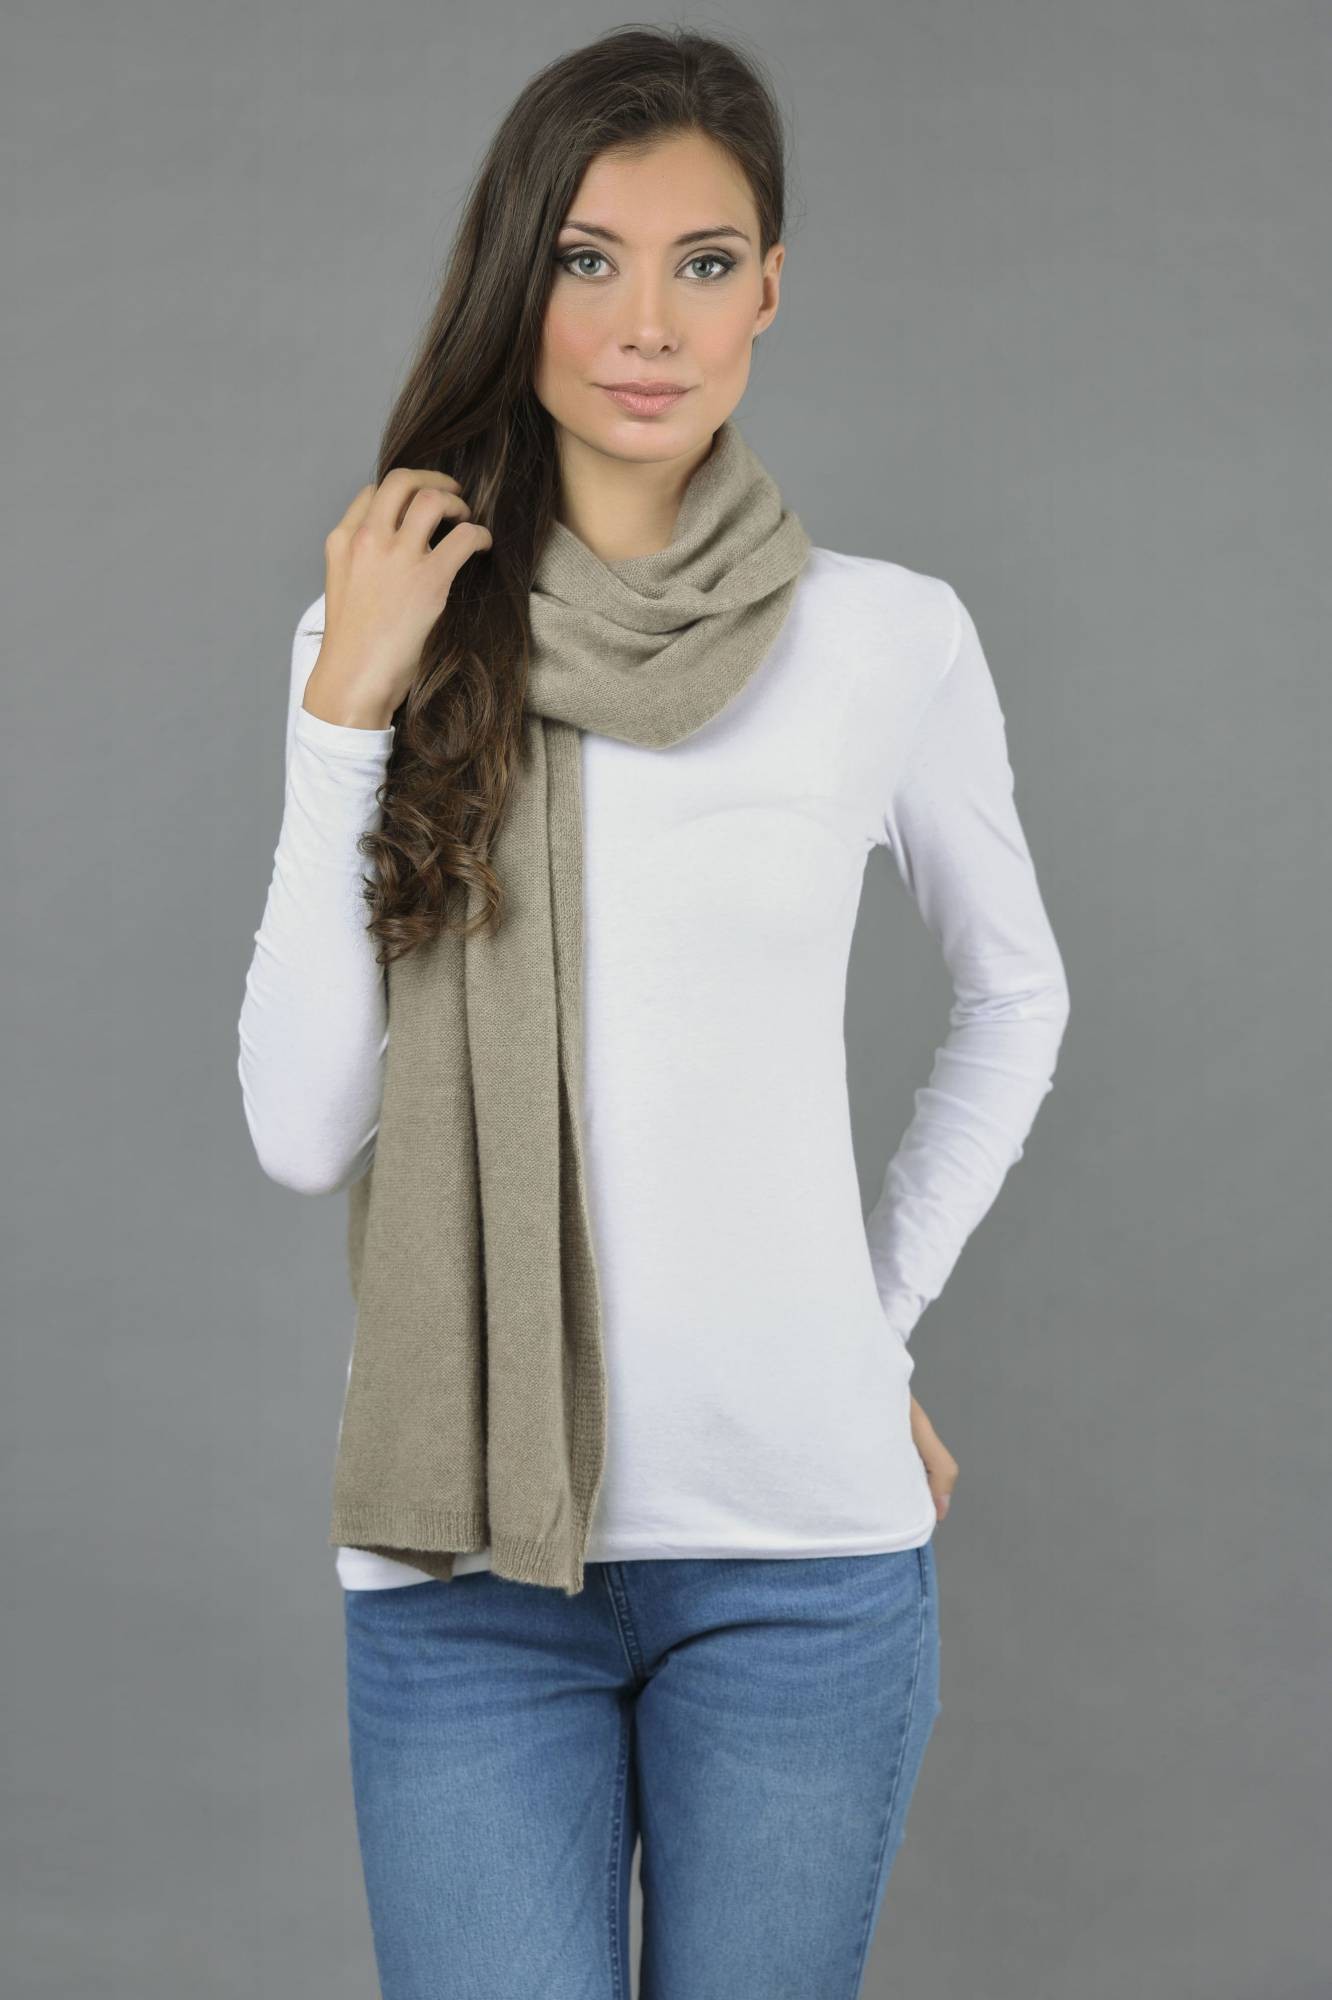 Pure Cashmere Plain Knitted Small Stole Wrap in Camel Brown  2